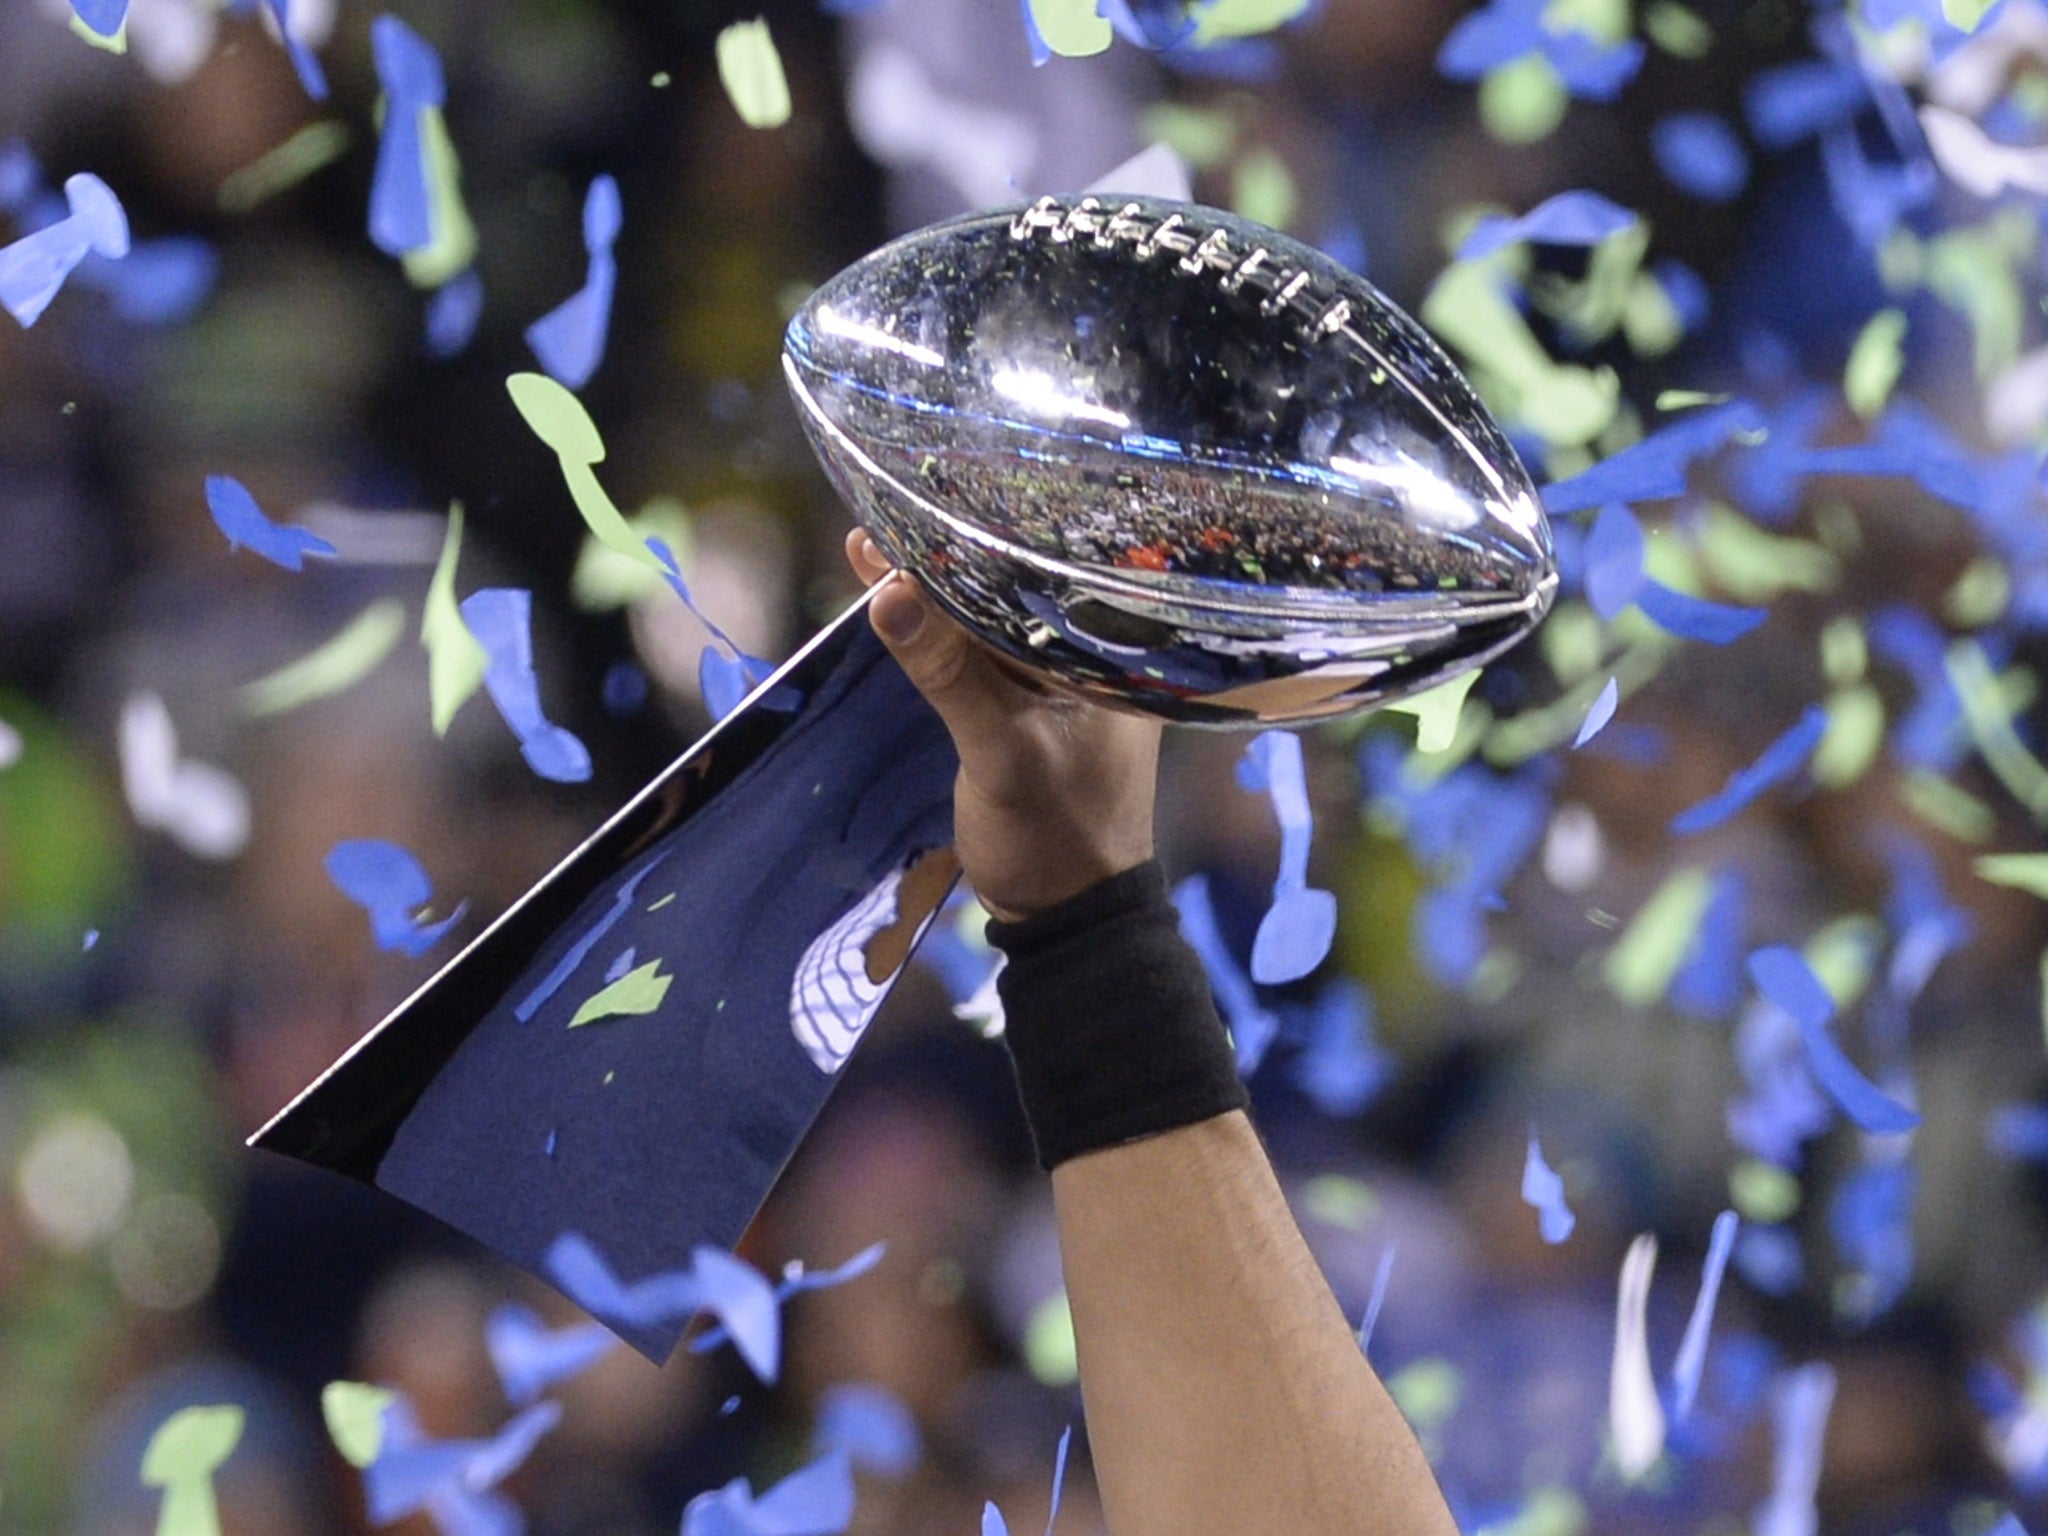 NBC to make 350 million in ad revenue from the Super Bowl The